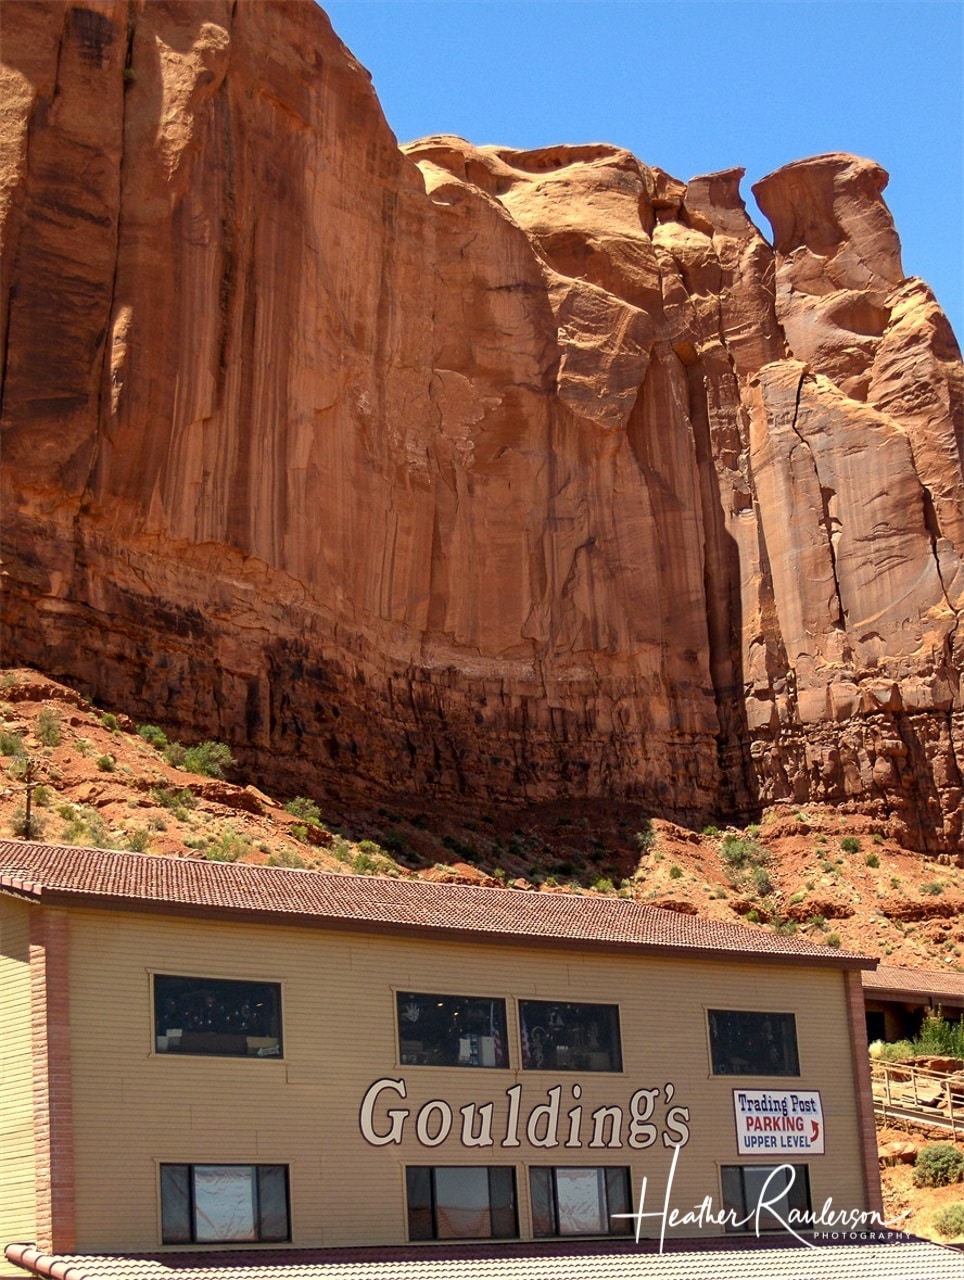 Goulding's Lodge at Monument Valley